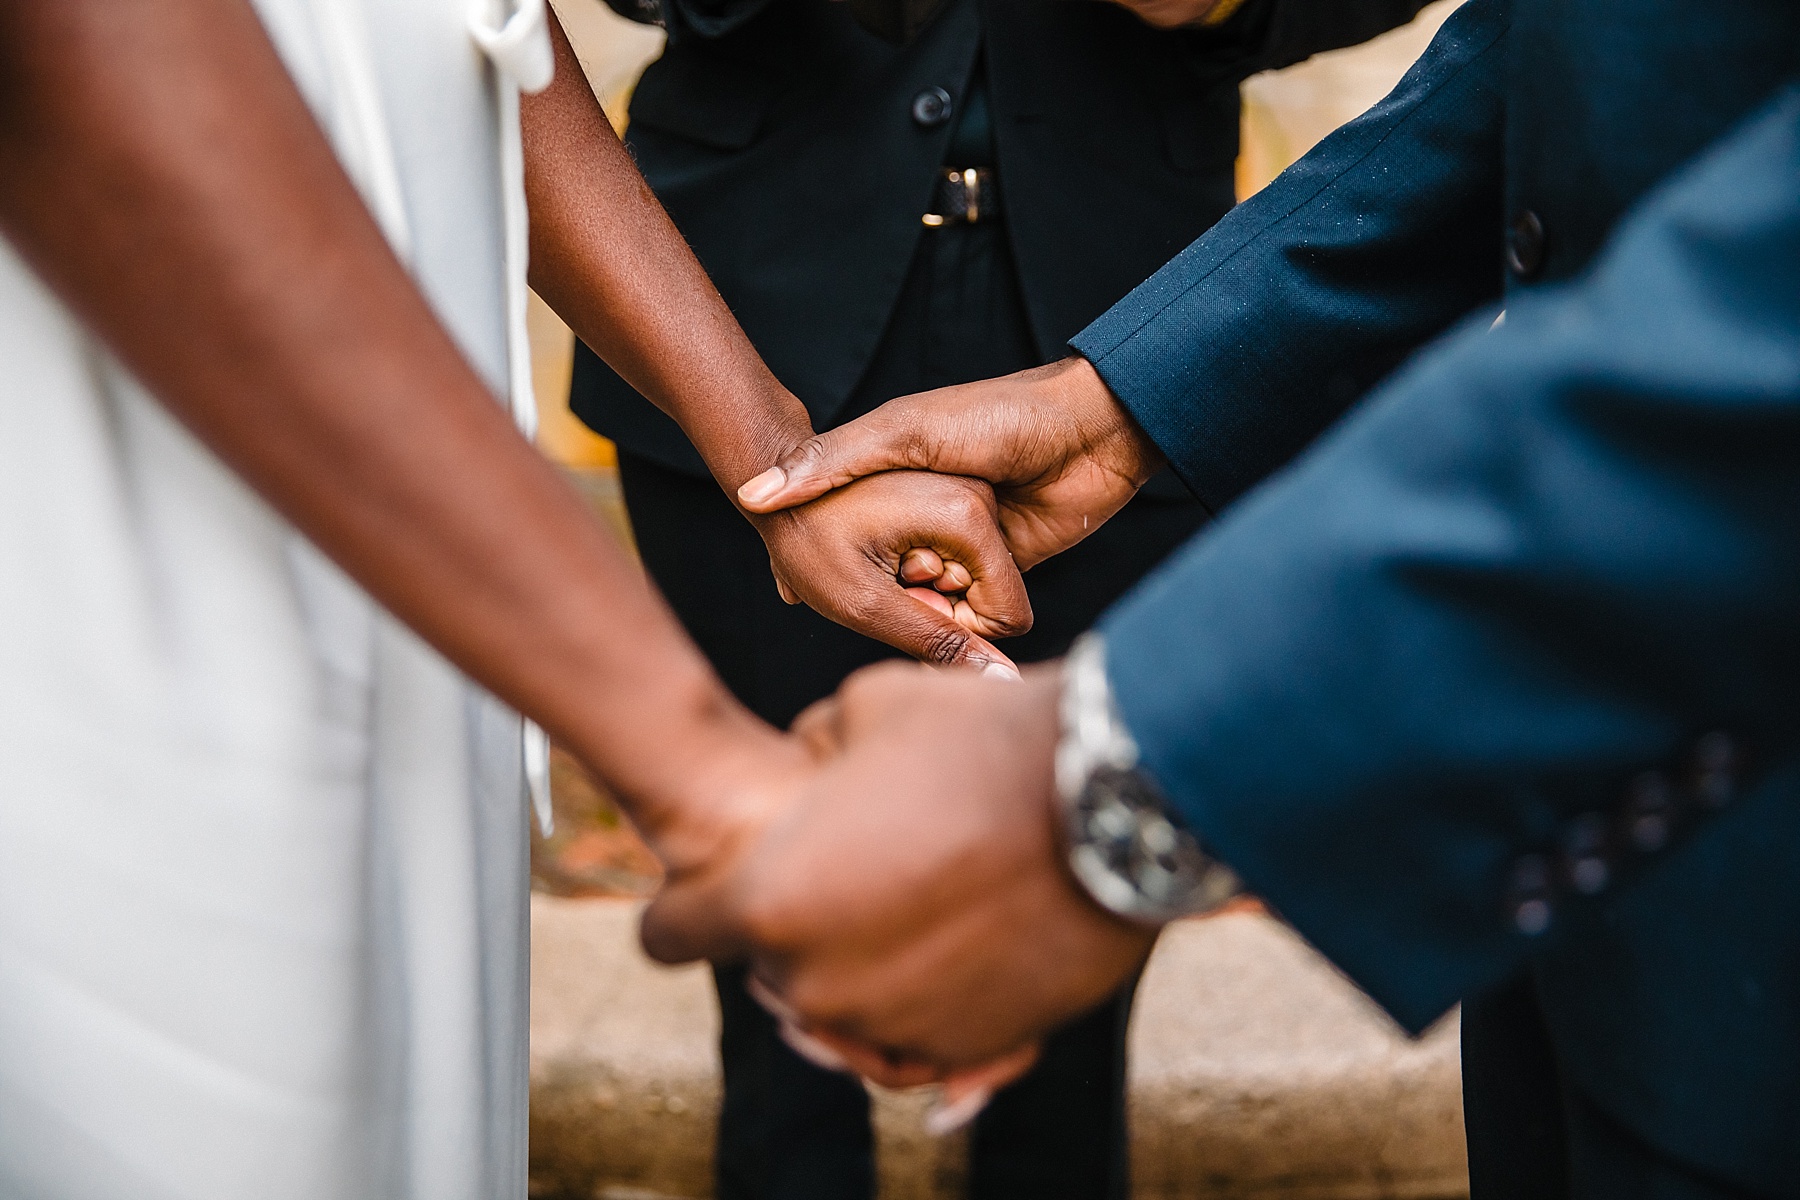 DC elopement photographed by Damien Carter Photography